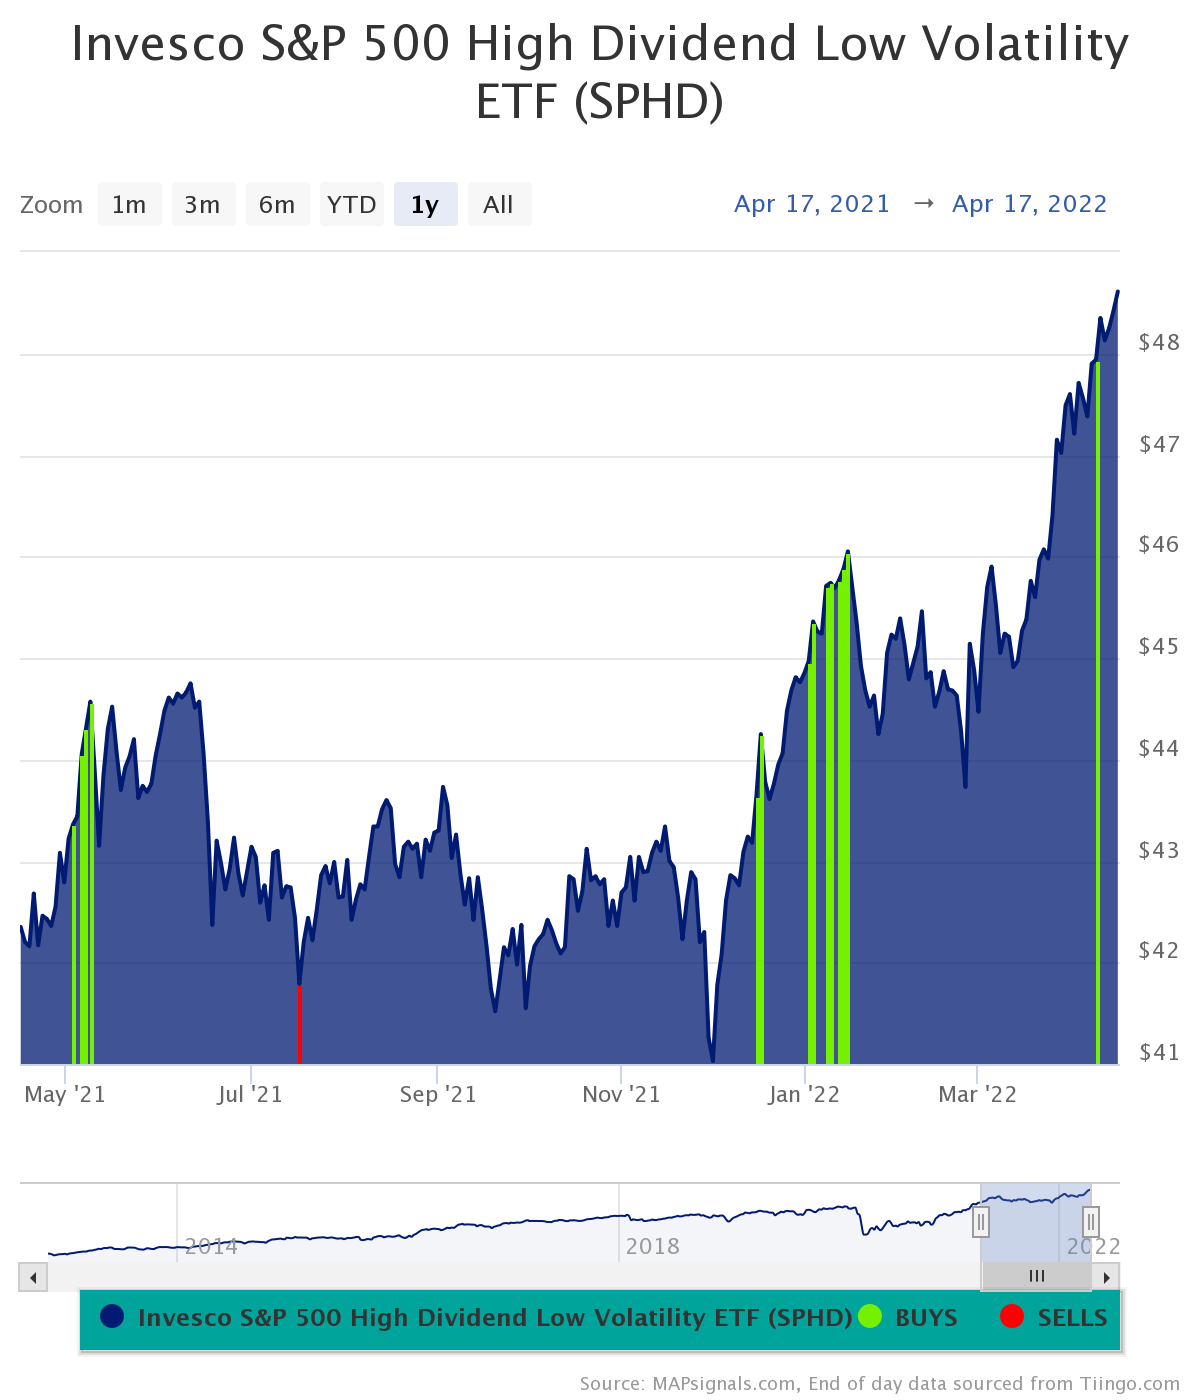 Invesco S&P 500 High Dividend Low Volatility ETF (SPHD)